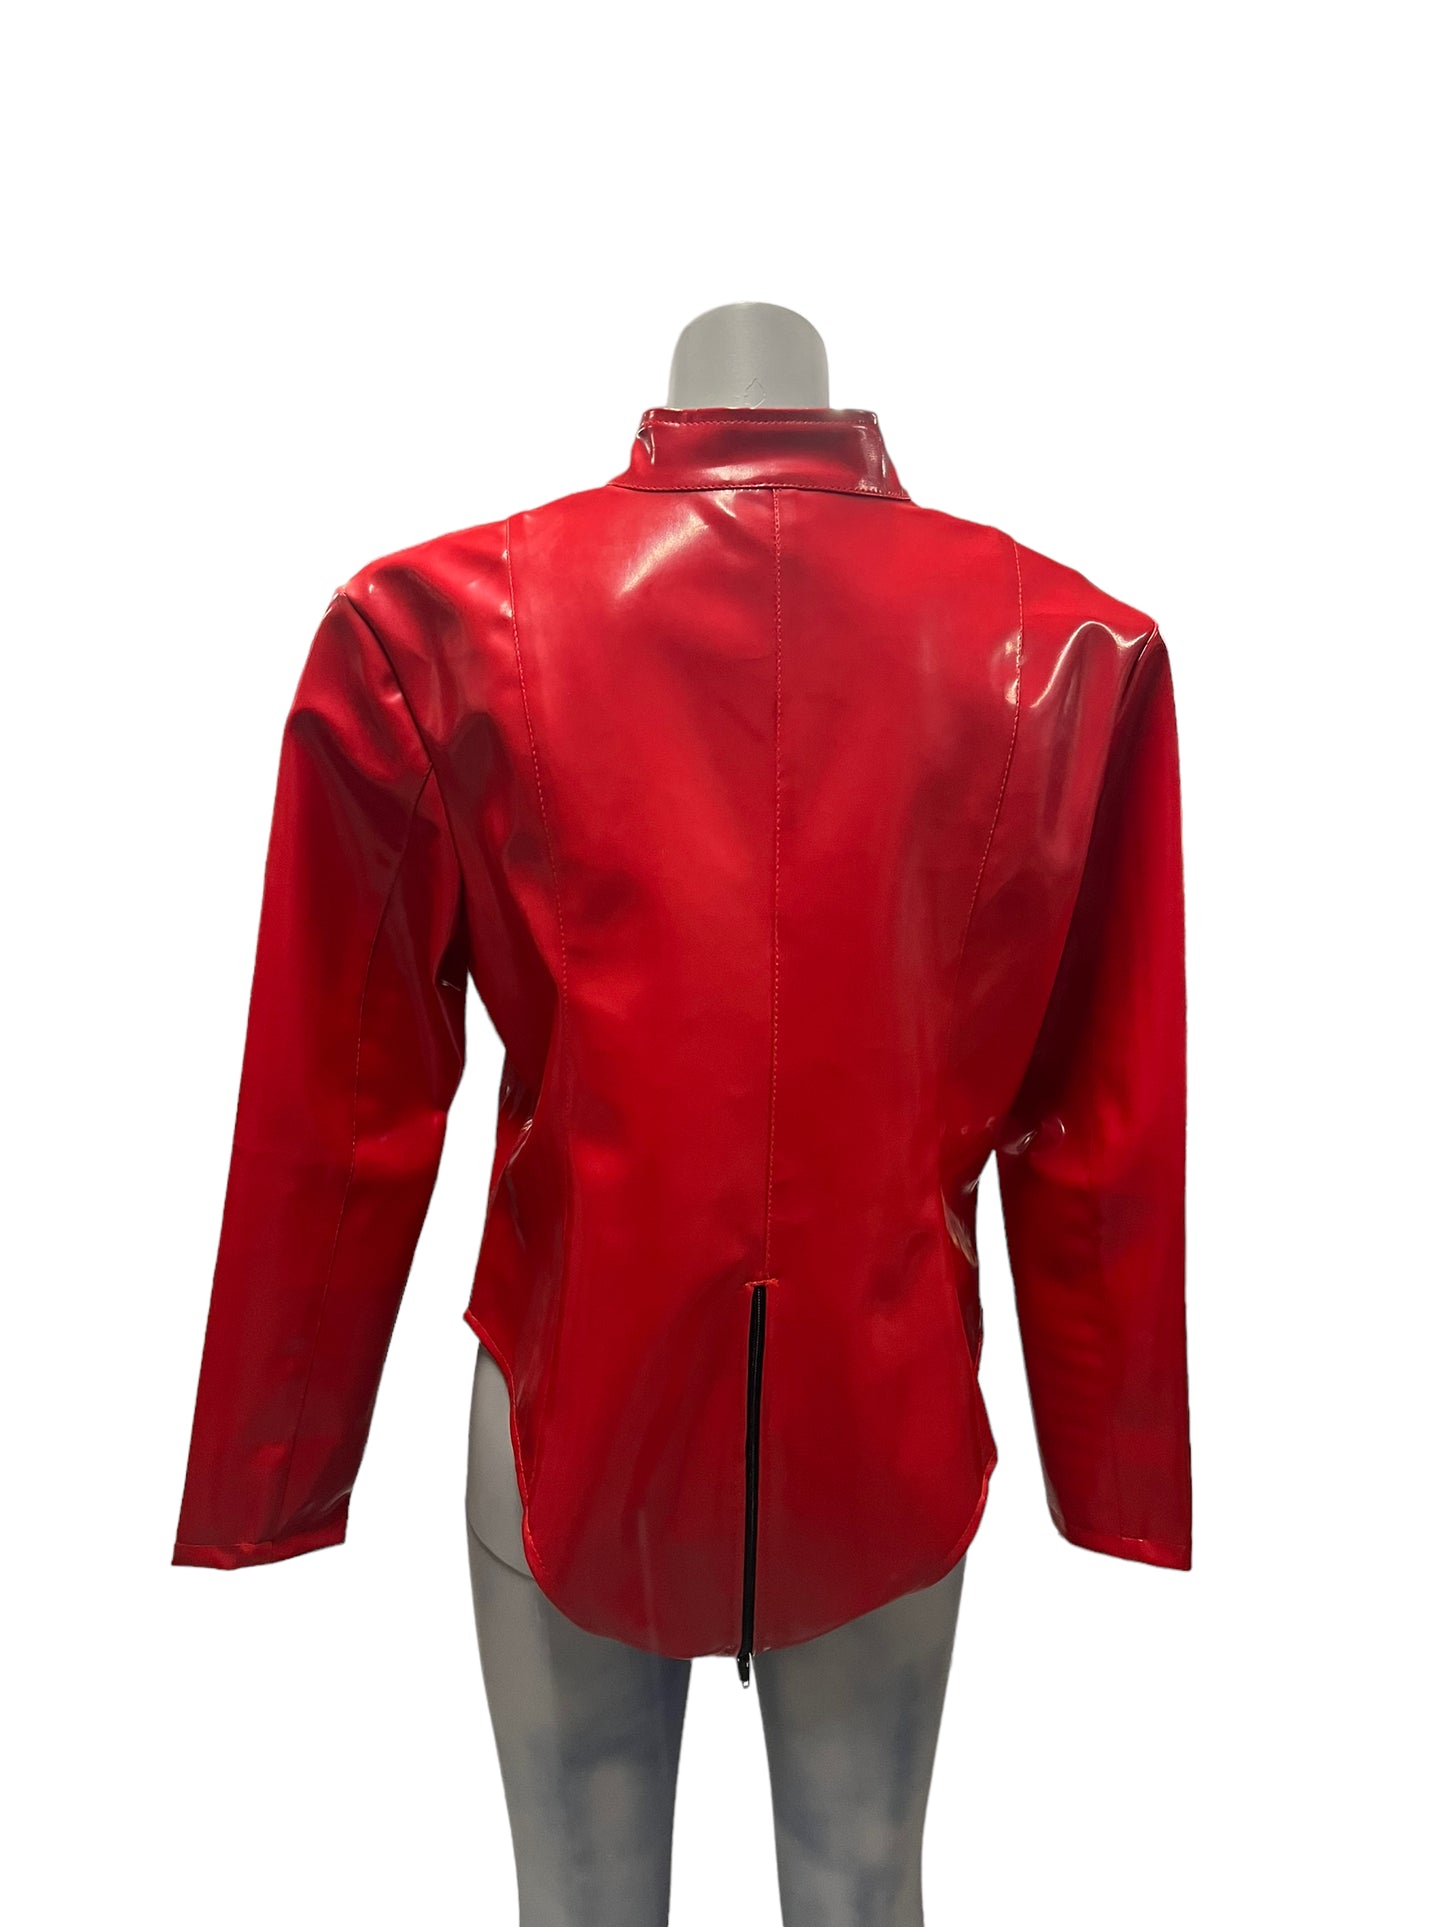 Fashion World - LL117 - Red Jacket with Sheer Chest - Size XL